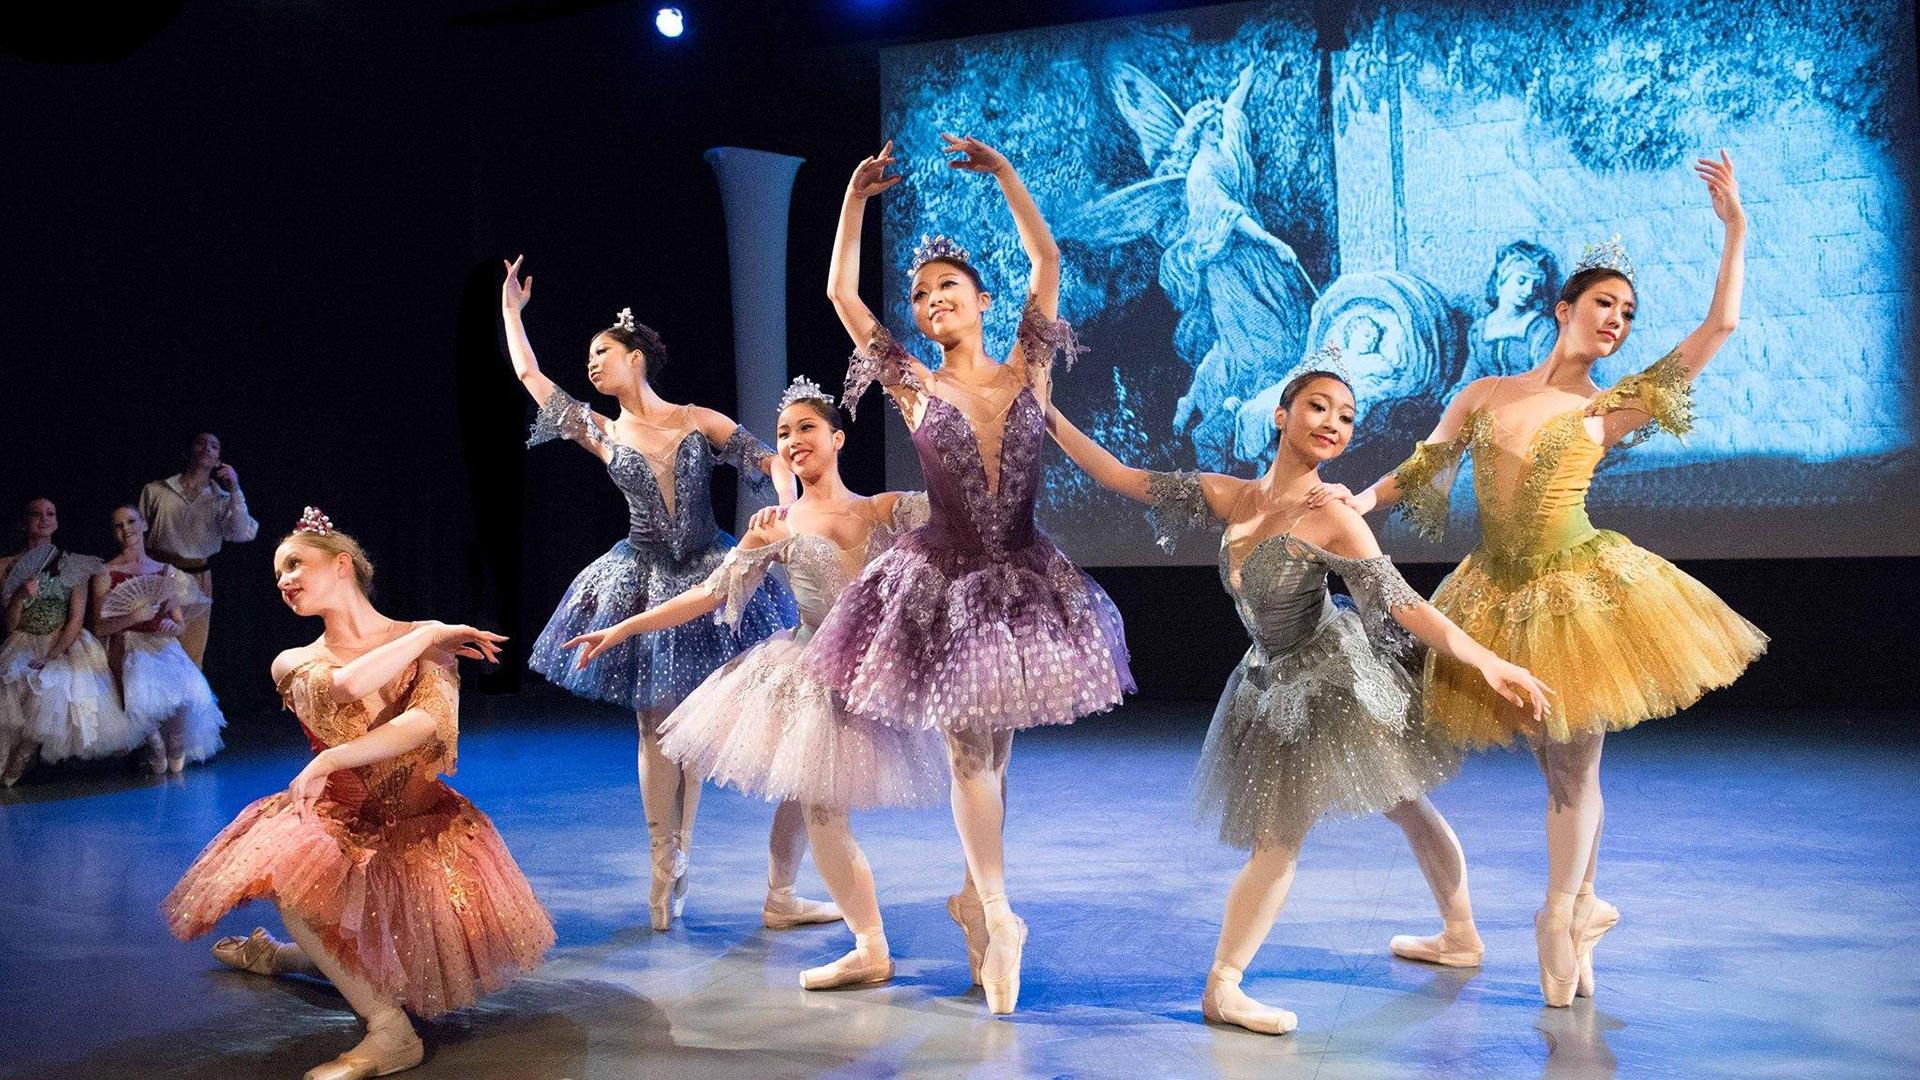 Fairies in the 2015 production of “Sleeping Beauty.” (Photo by Matt Galvin)